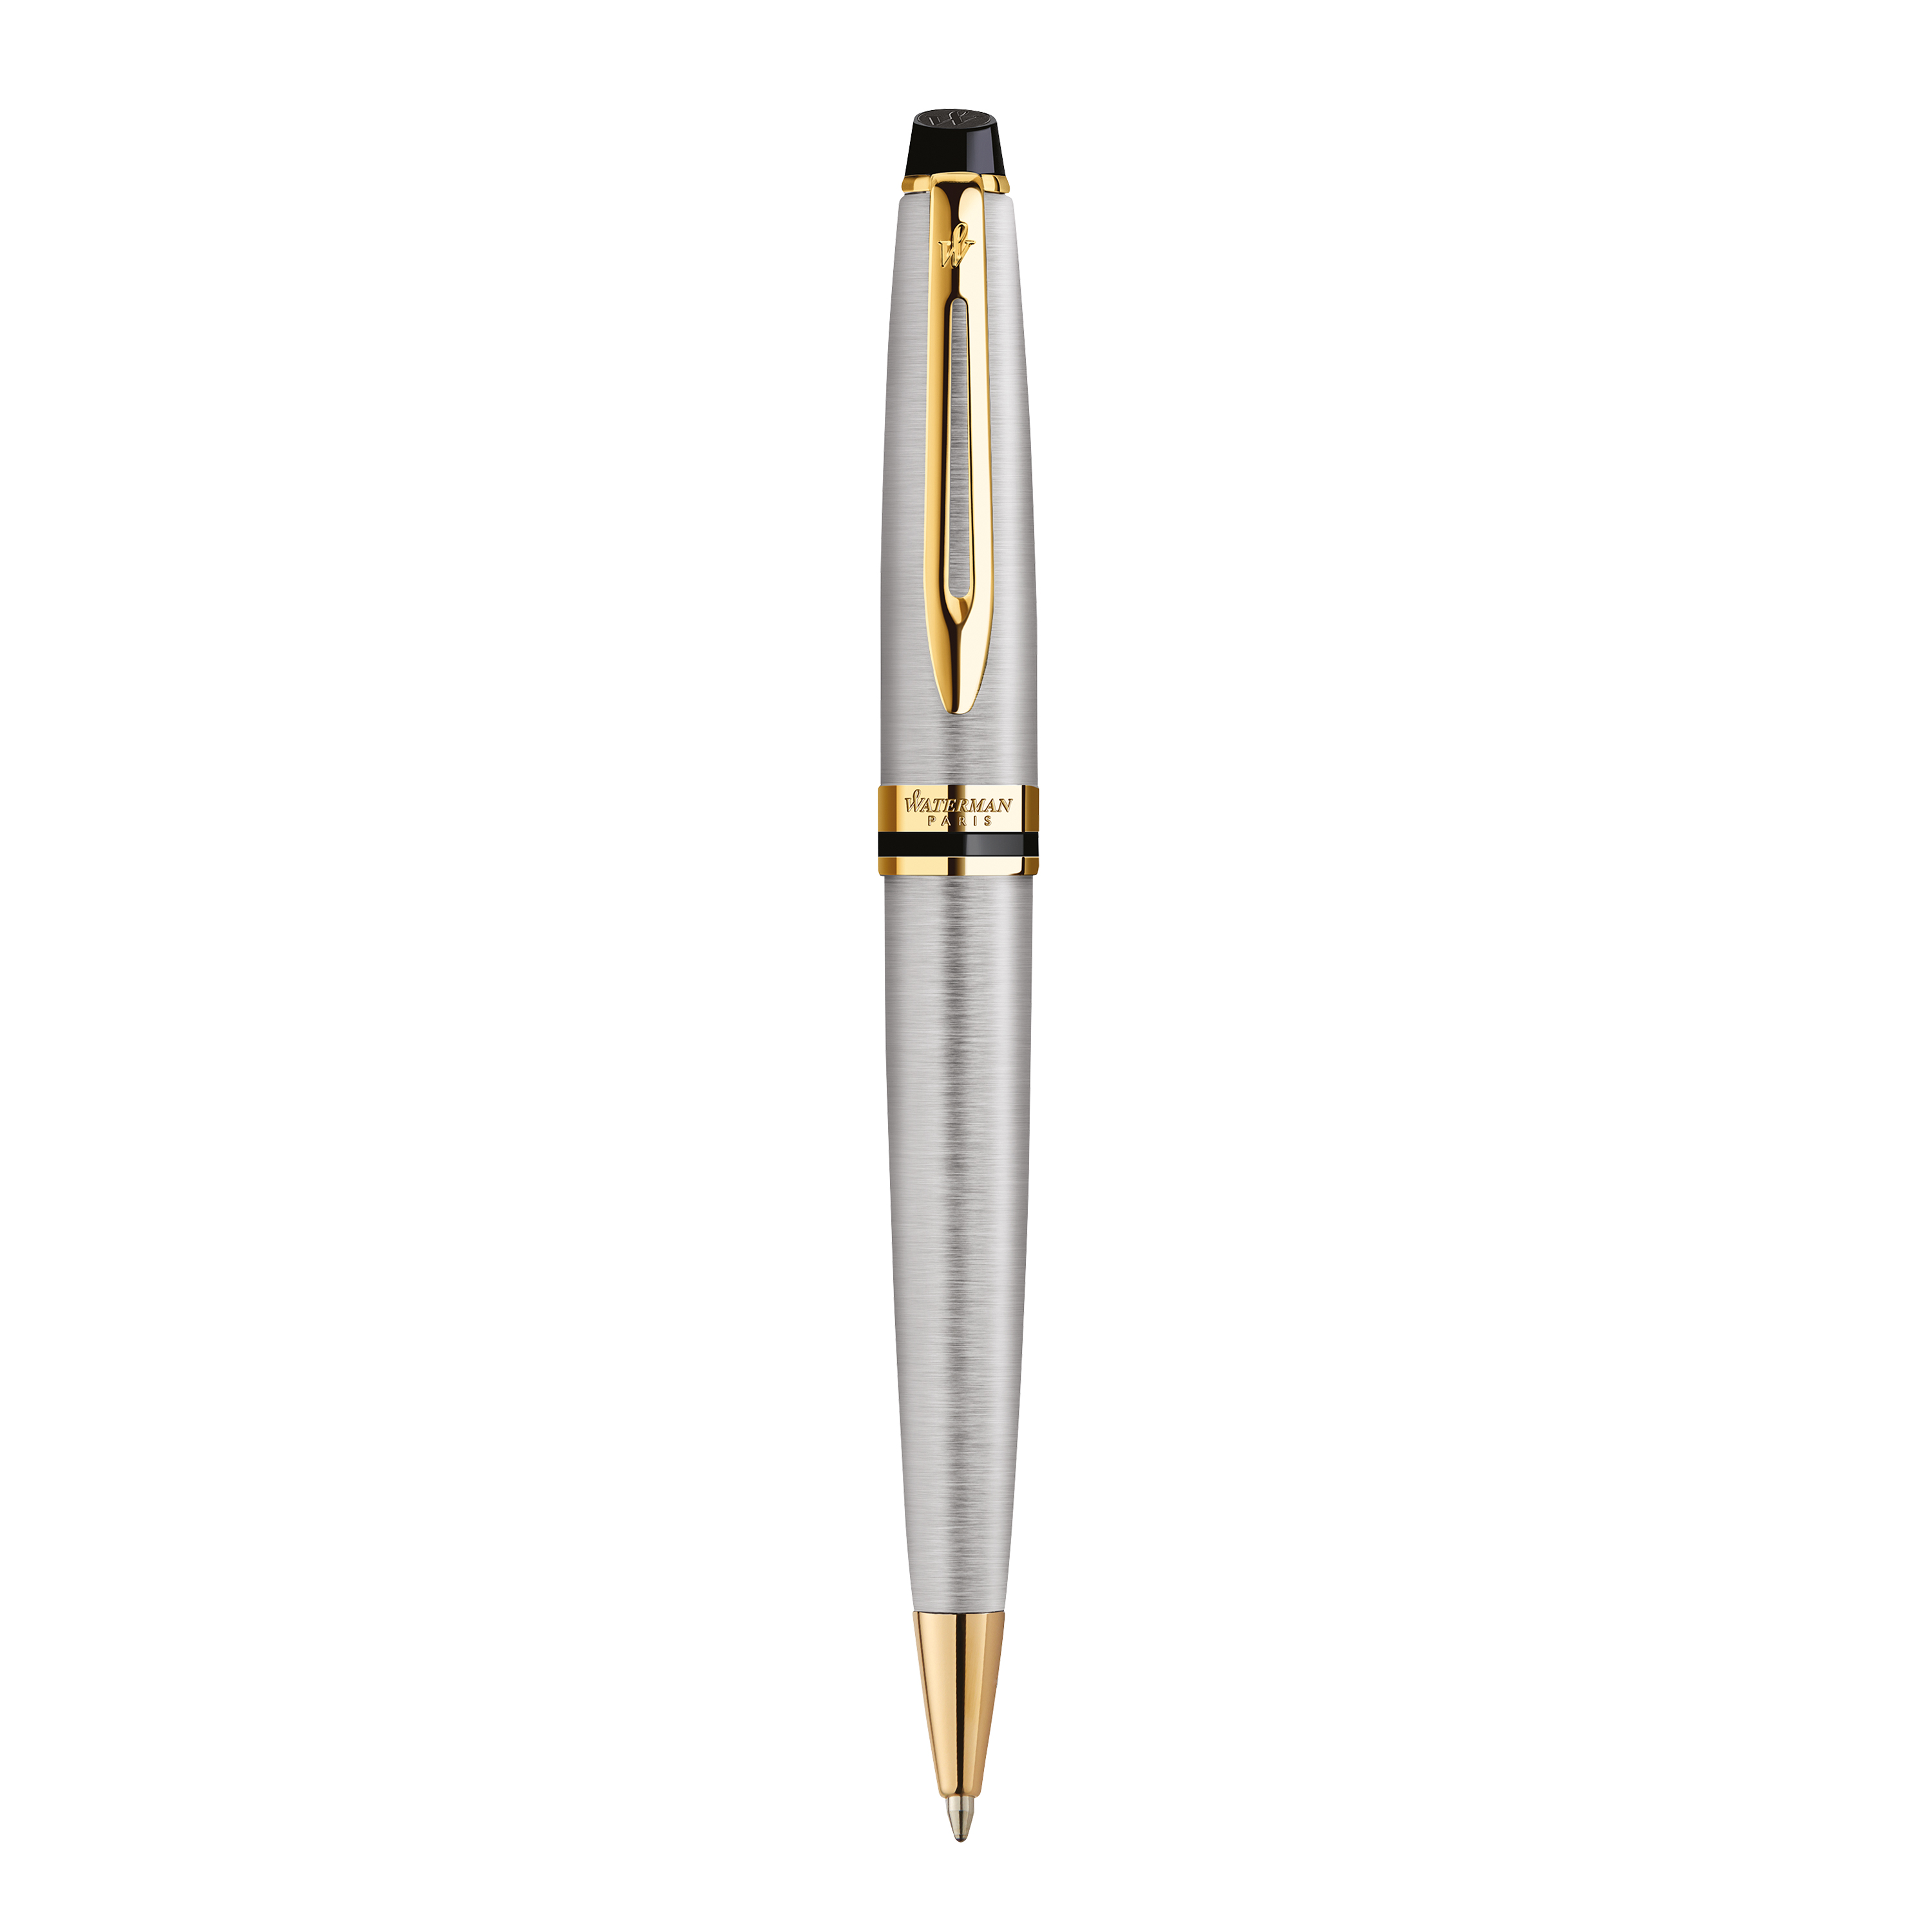 Waterman Expert Stainless Steel Gold Trim Ballpoint - Pencraft the boutique